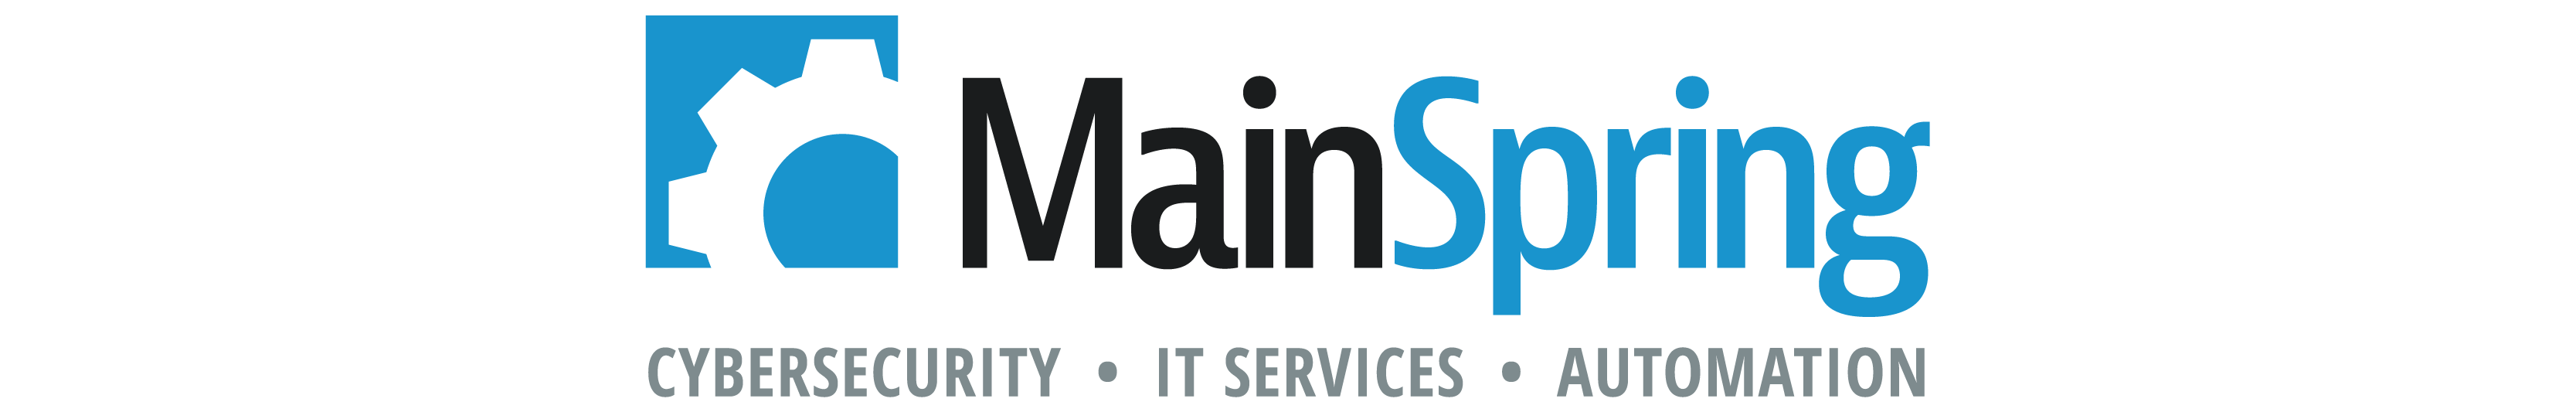 Mainspring Logo_Horizontal with Tagline_for Hubspot